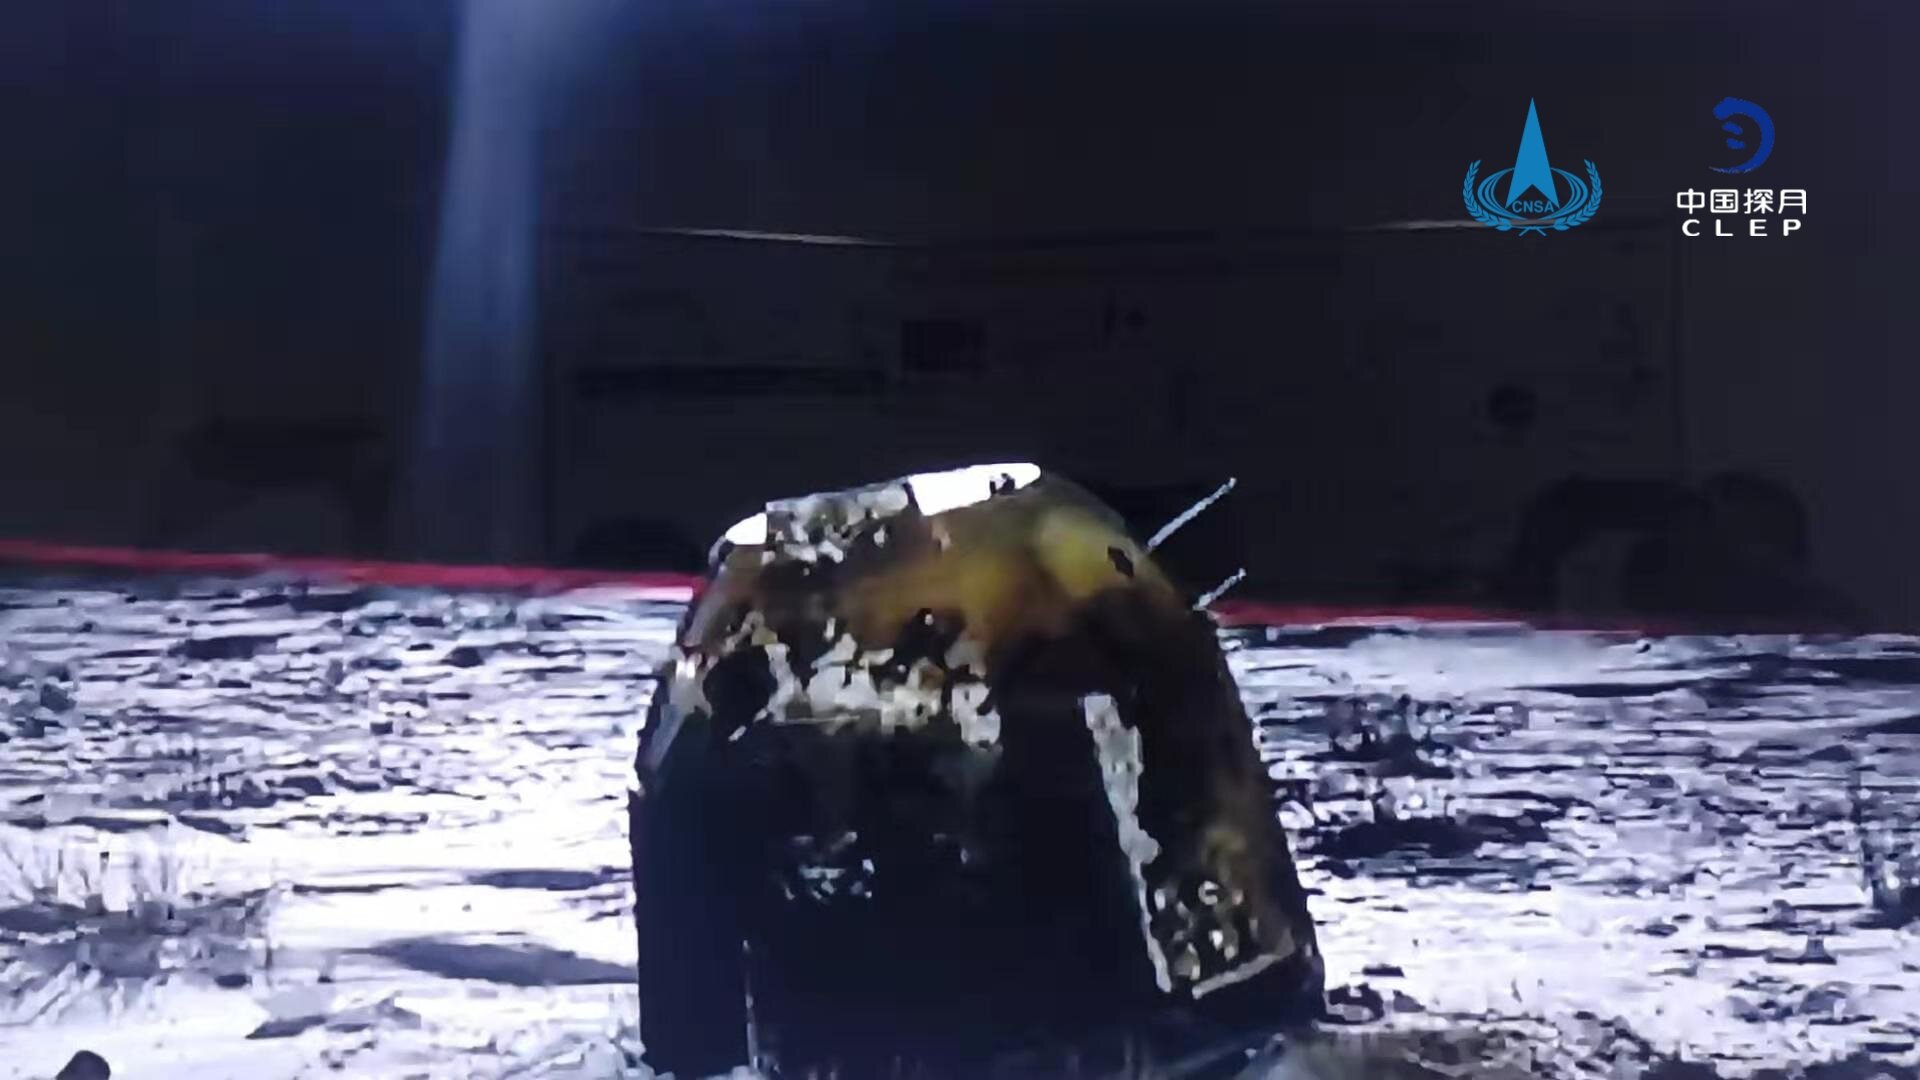 Chinese Return to Earth With Lunar Rocks for the First Time Since 1976